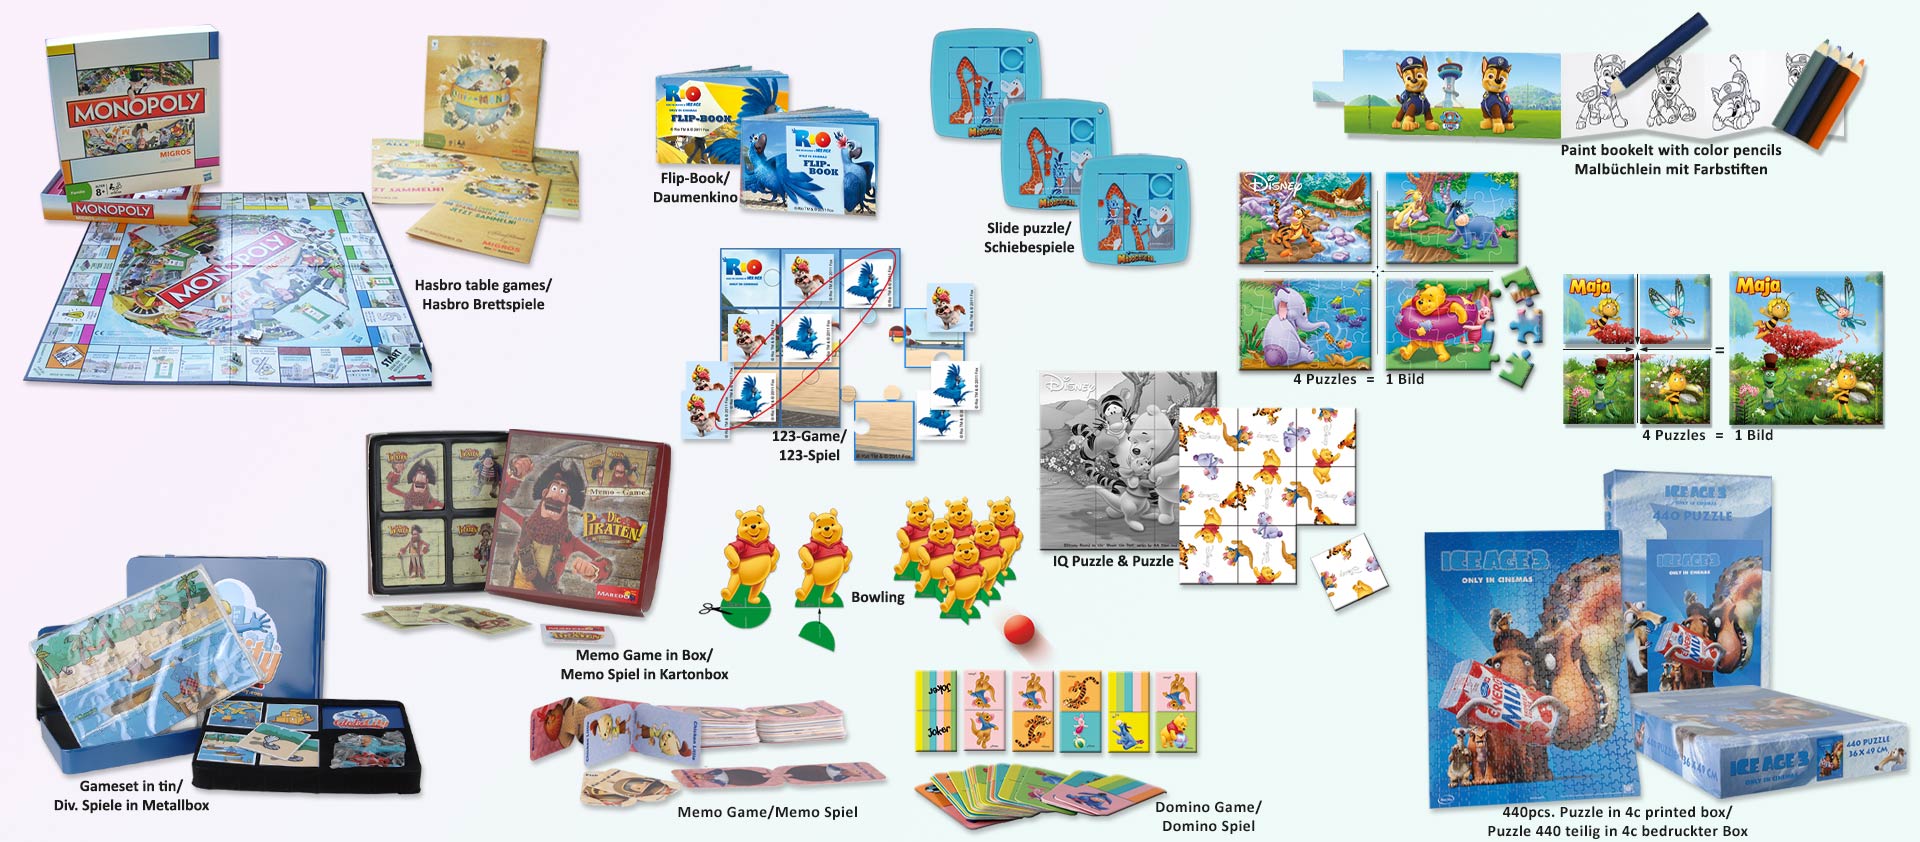 Die Abbildung zeigt Spiele, wie Memo Game, Puzzle, Schiebespiel, Kegeln, Domino, Brettspiele, sowie Malbüchlein oder Rätselbüchlein mit Farbstiften. The picture shows games, such as memo game, puzzle, slide puzzle, skittles, domino game, board games, as well as coloring booklets or puzzle booklets with color pencils.